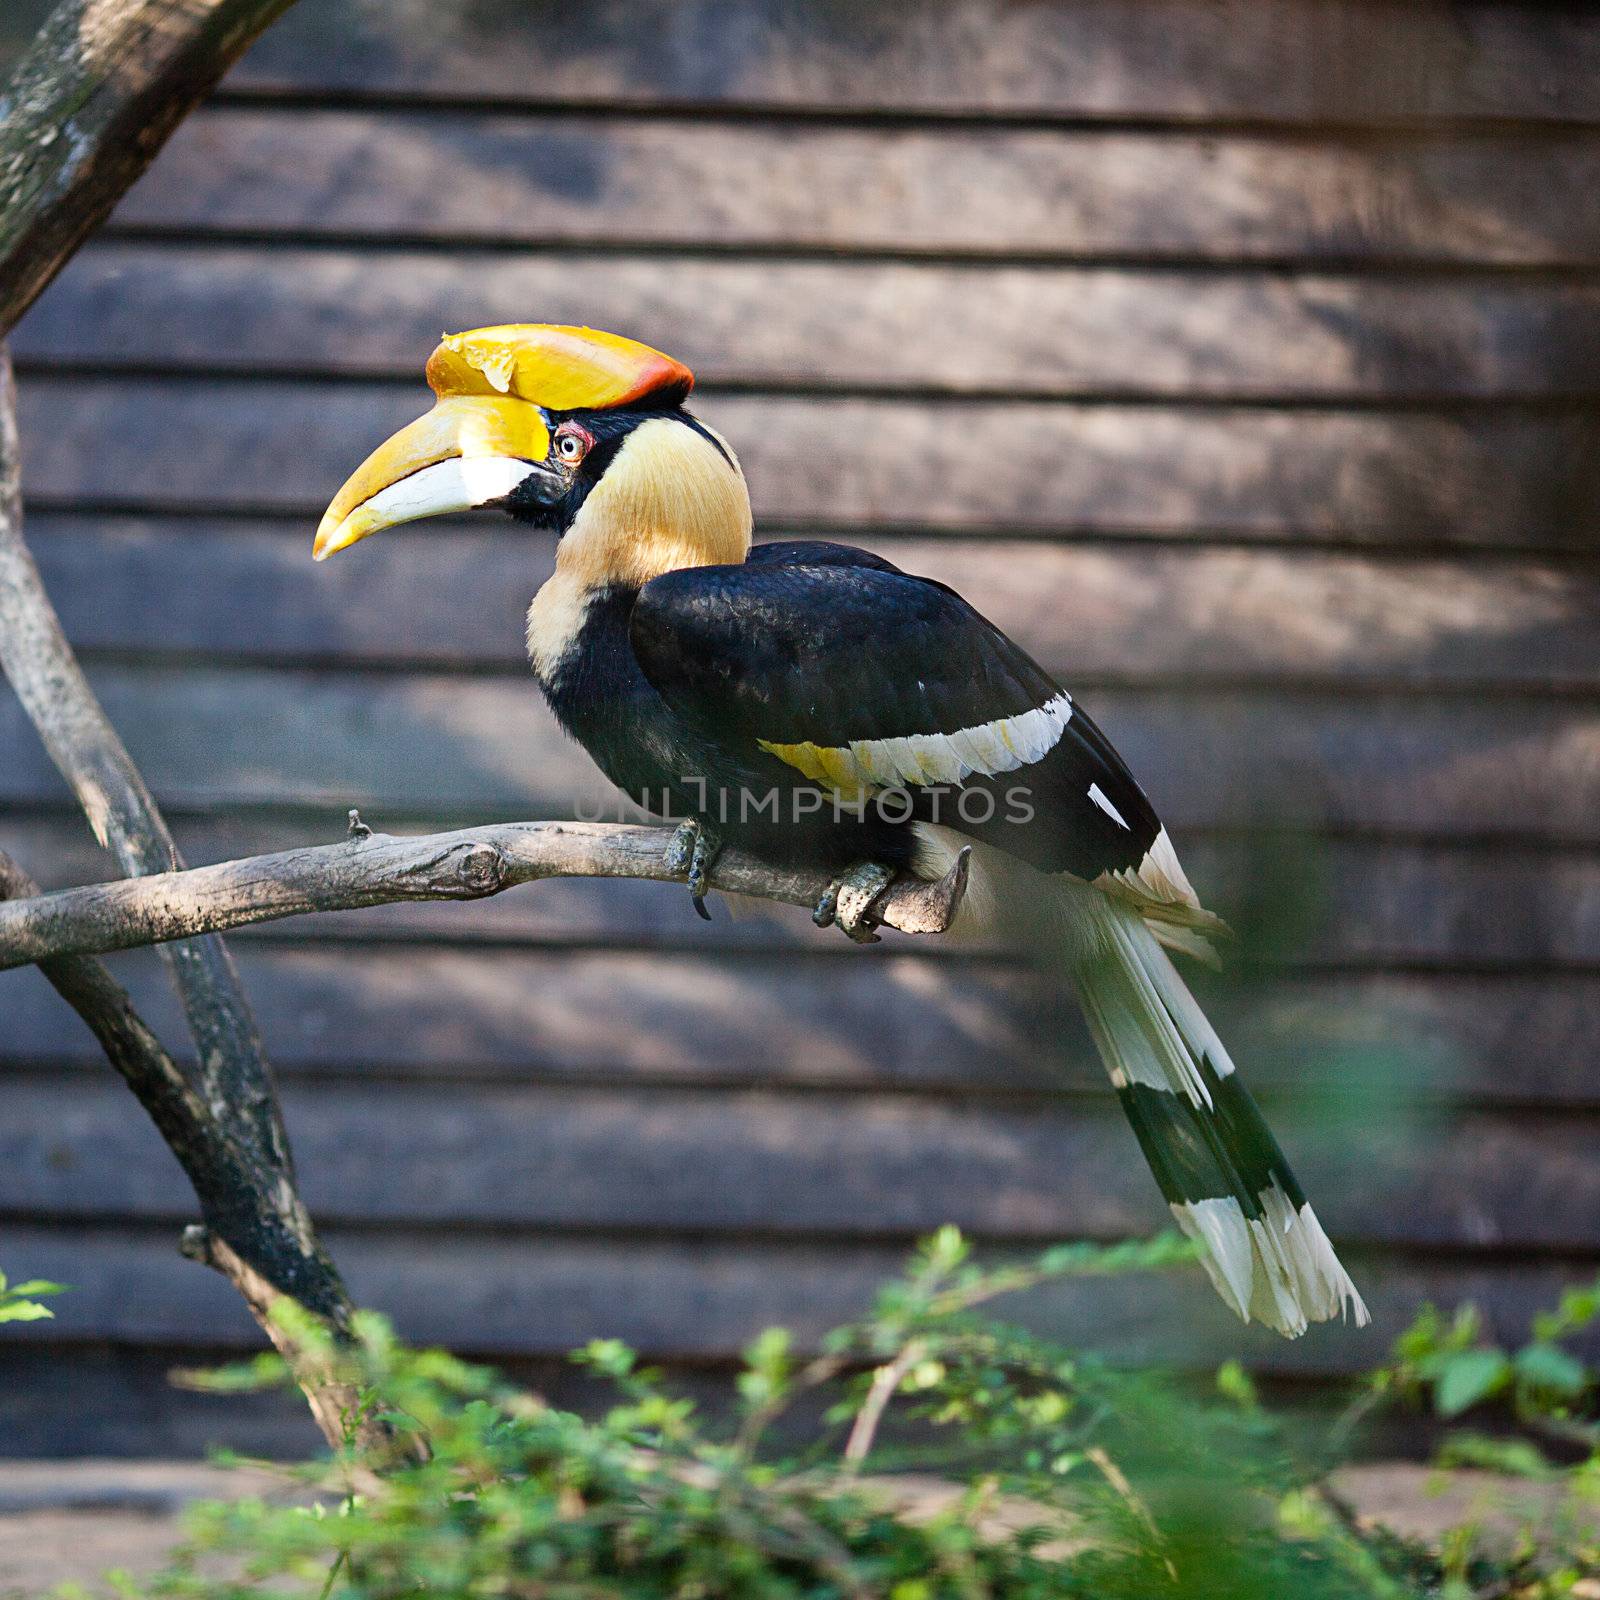 toucan bird at the zoo by jannyjus